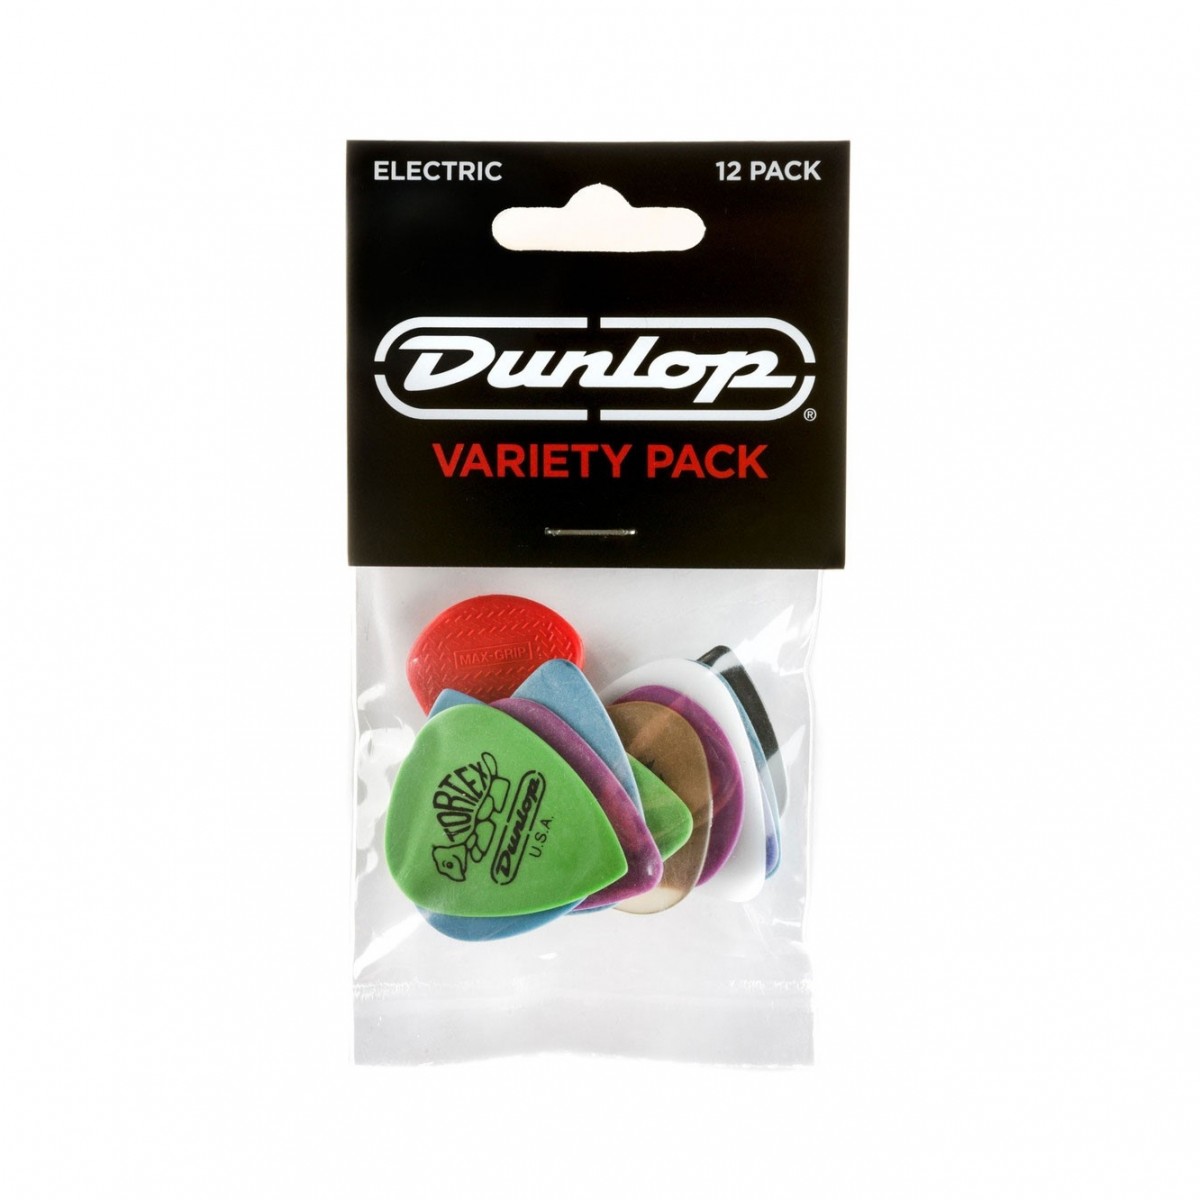 Dunlop Variety Pack PVP113 Electric